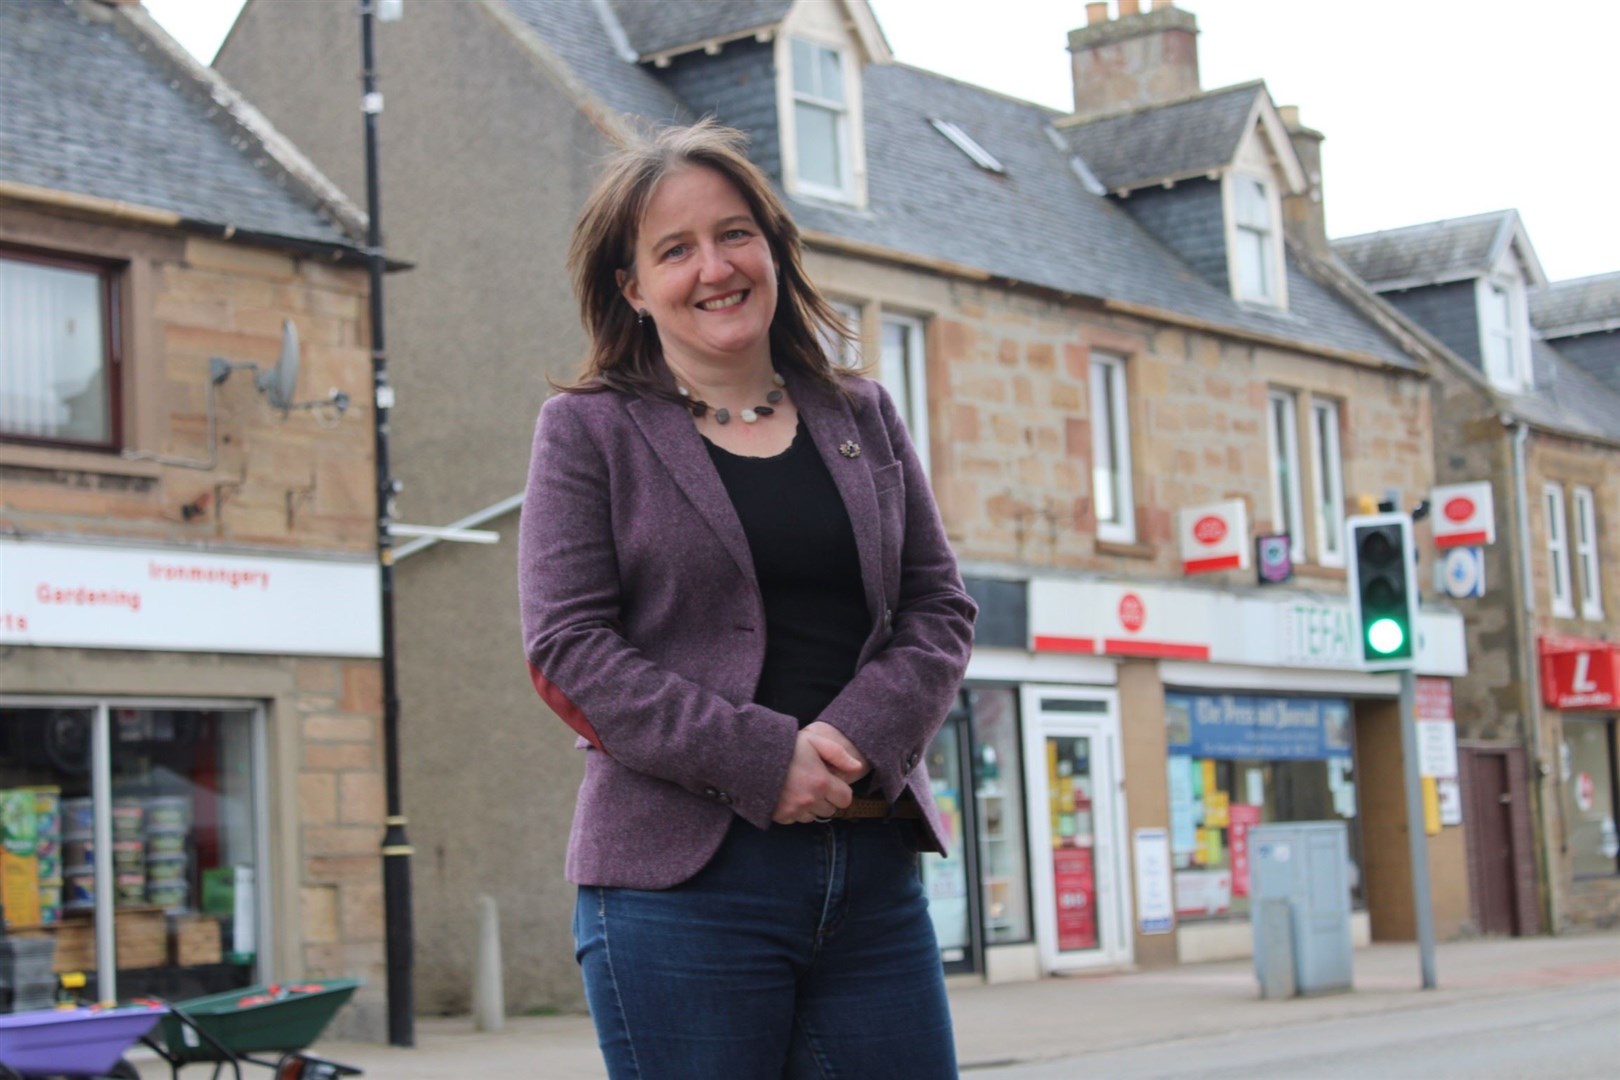 MSP Maree Todd hopes to open a new office in Alness.